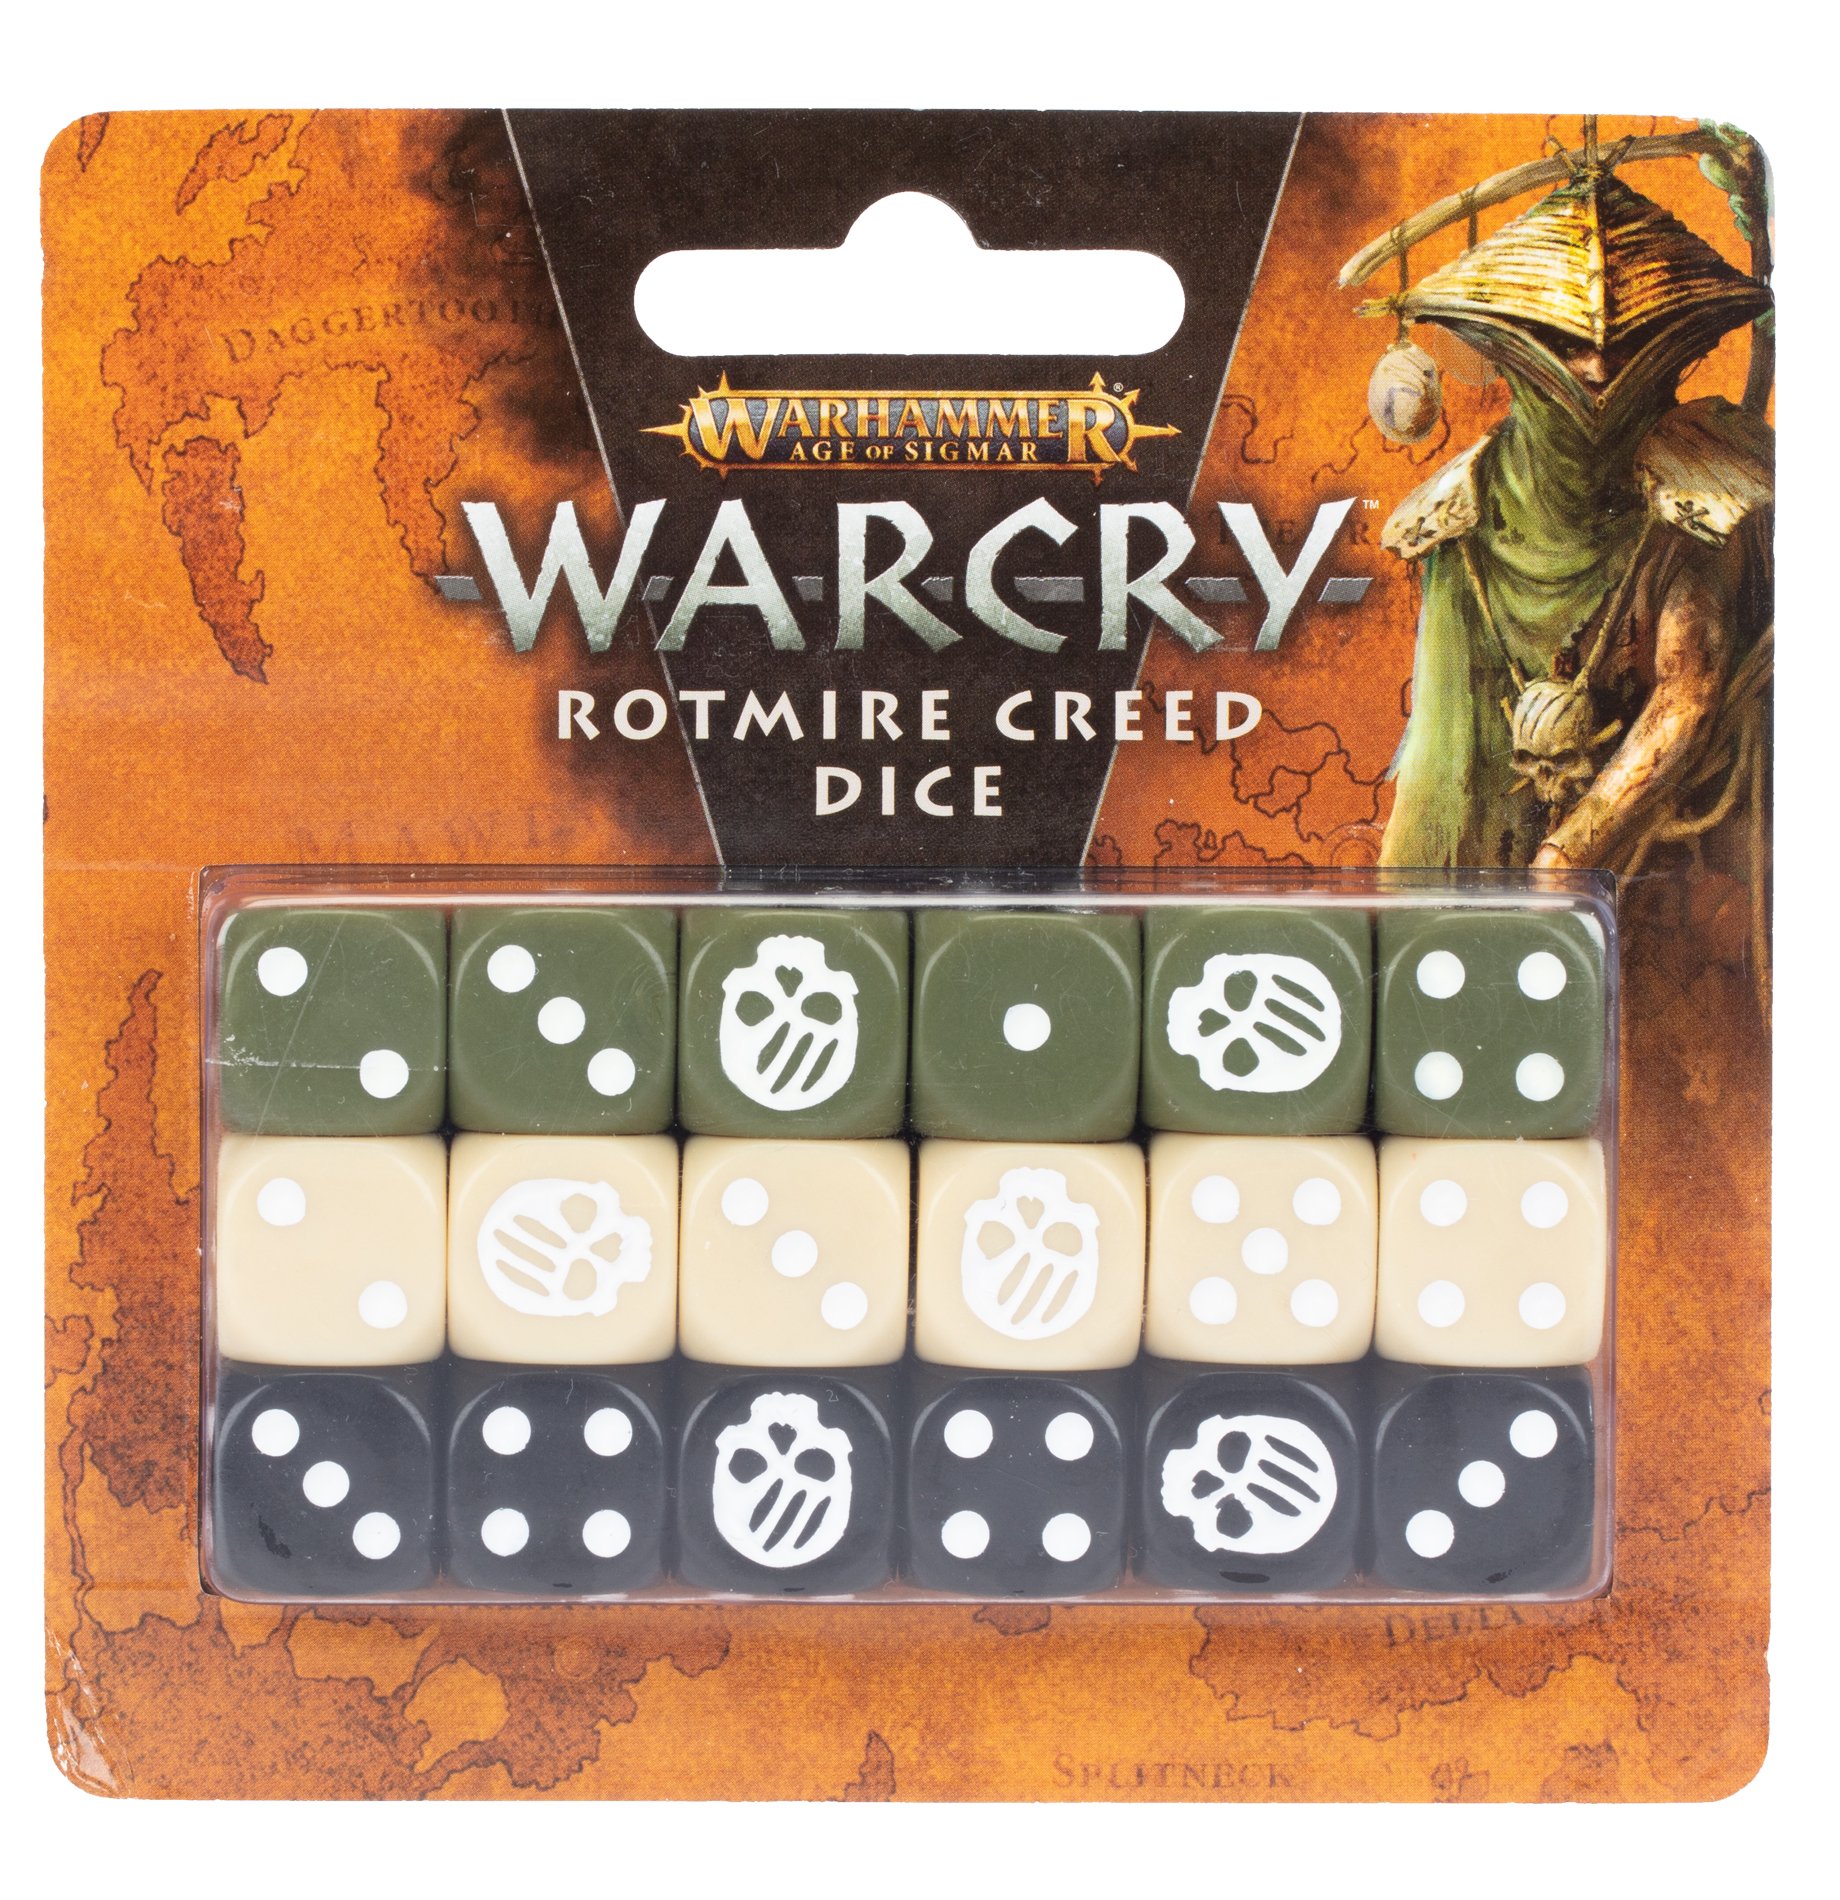 rot mire creed dice